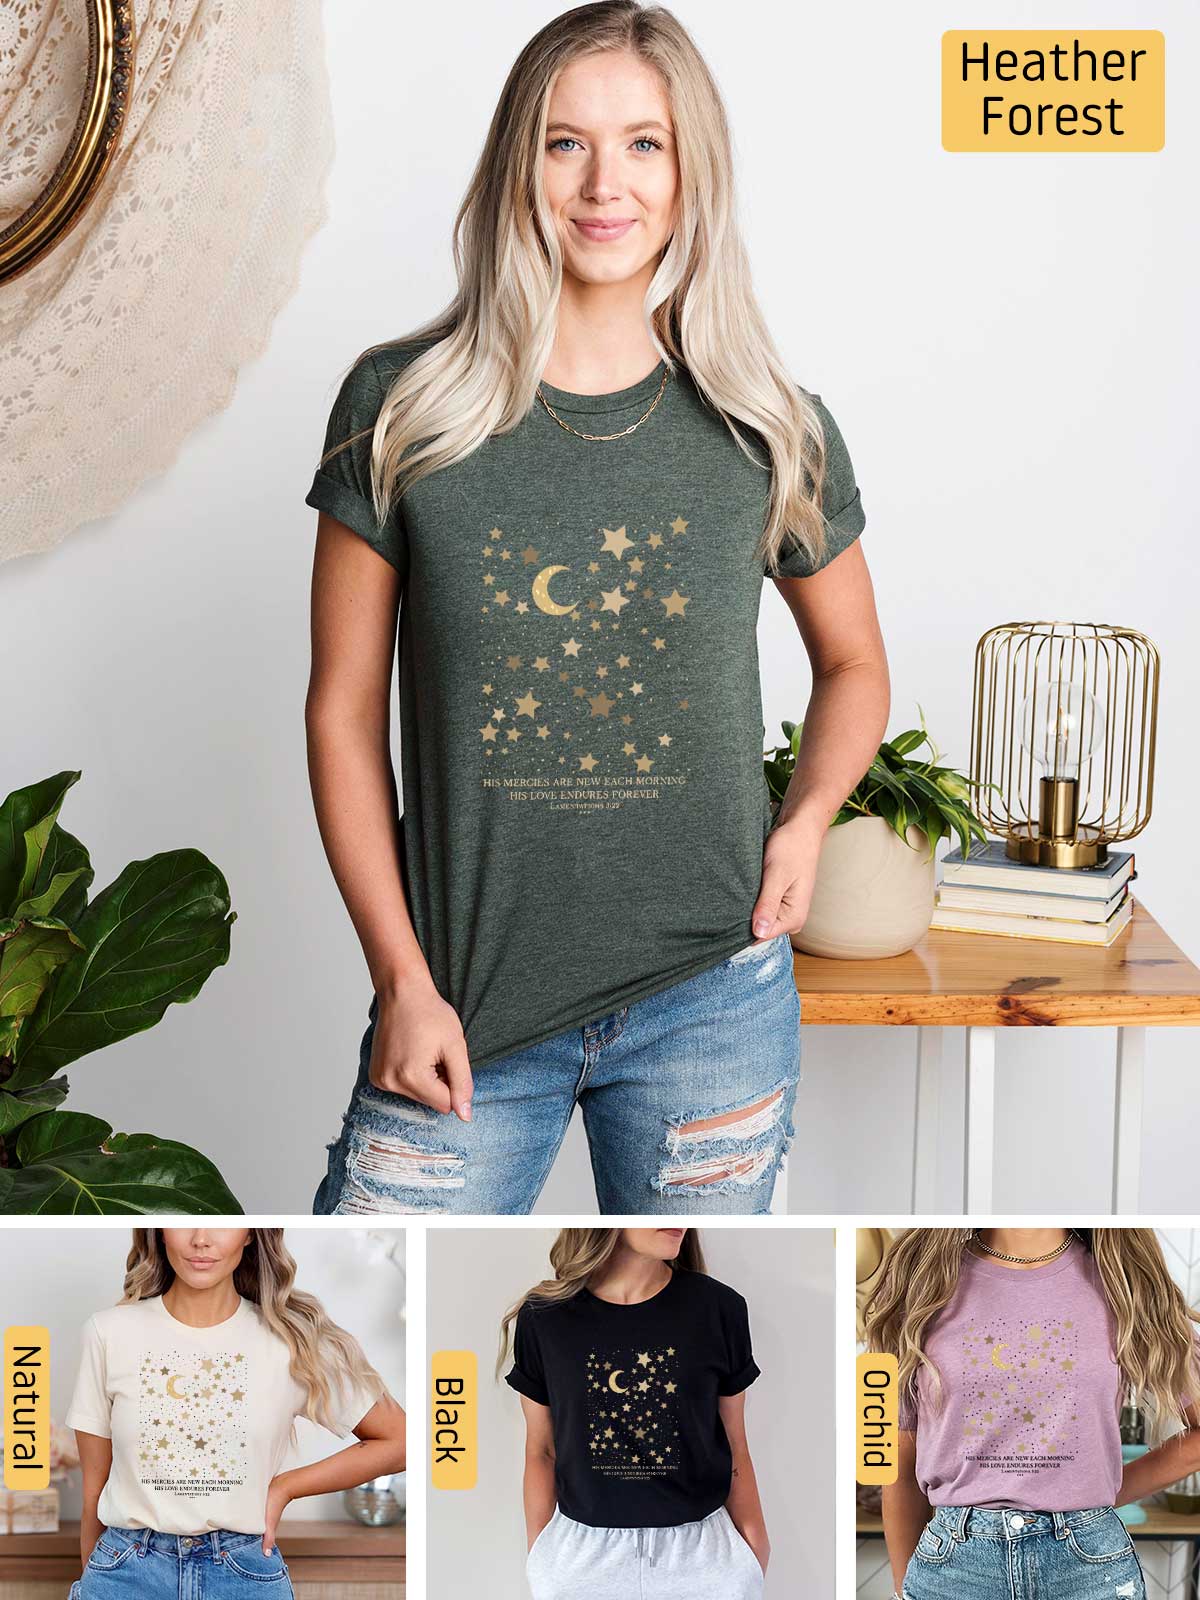 a woman wearing a t - shirt with stars and moon on it